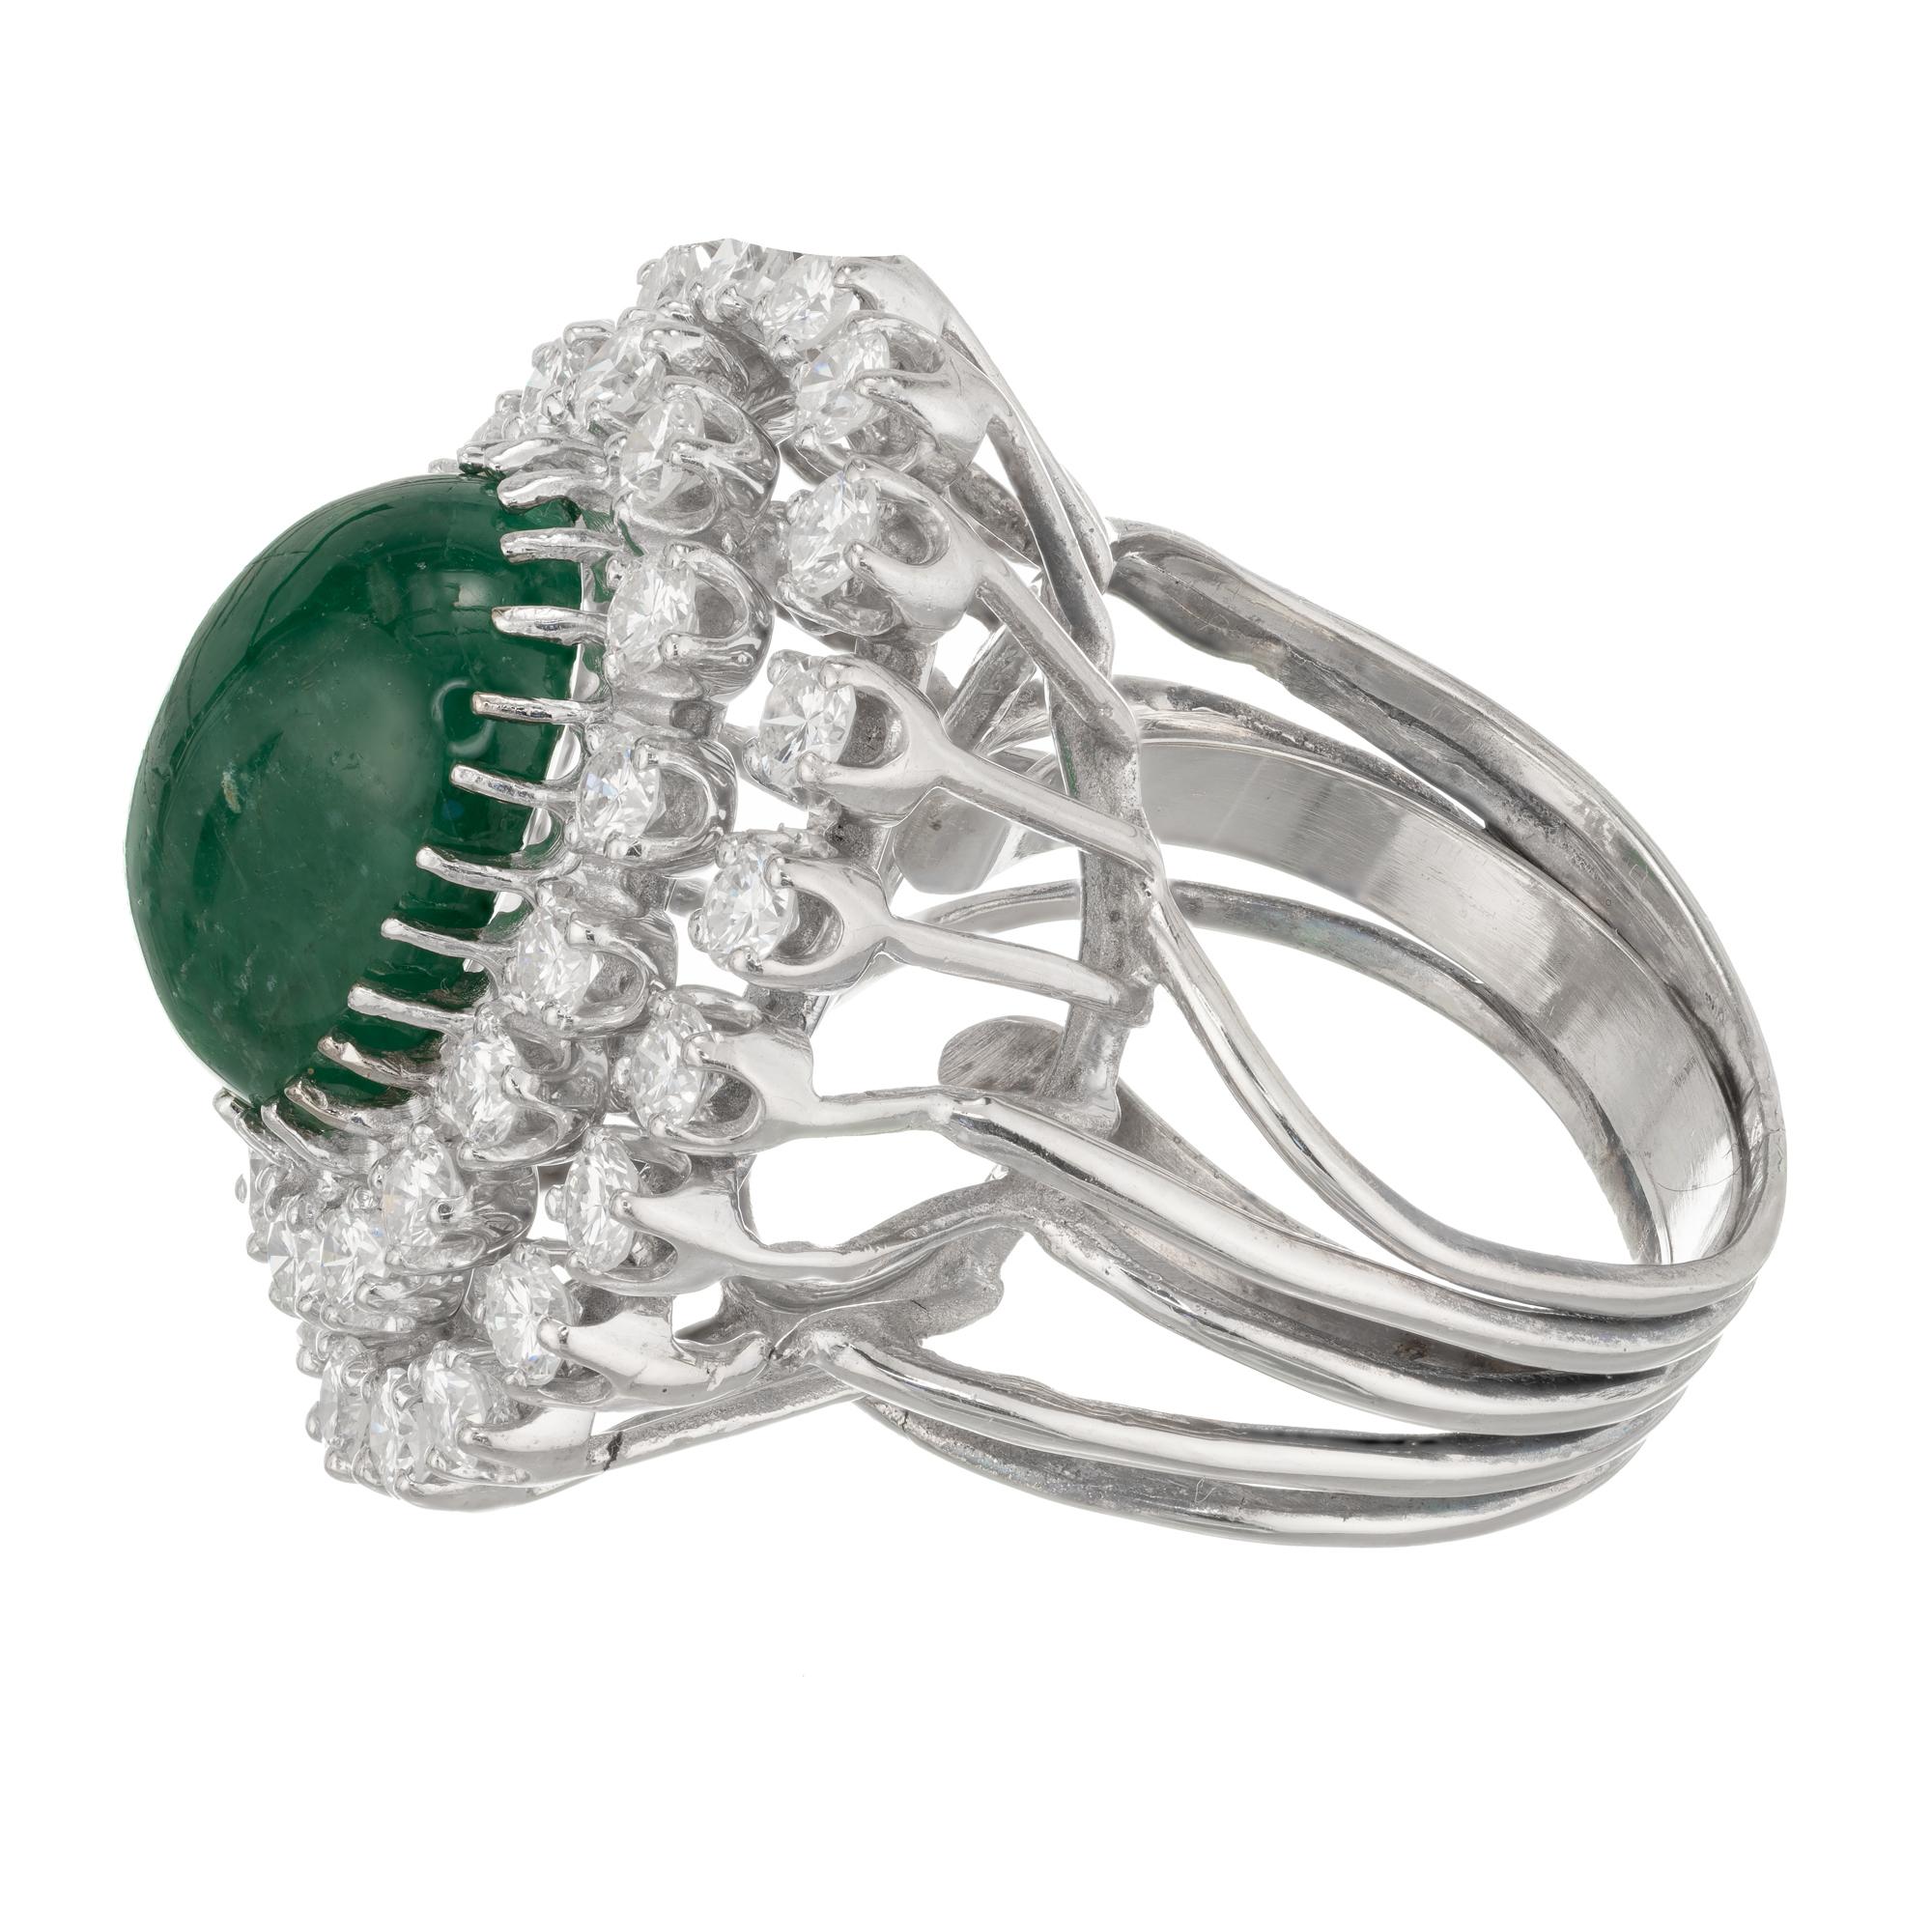 Oval Cut GIA Certified 3.00 Carat Emerald Diamond White Gold Midcentury Cocktail Ring For Sale